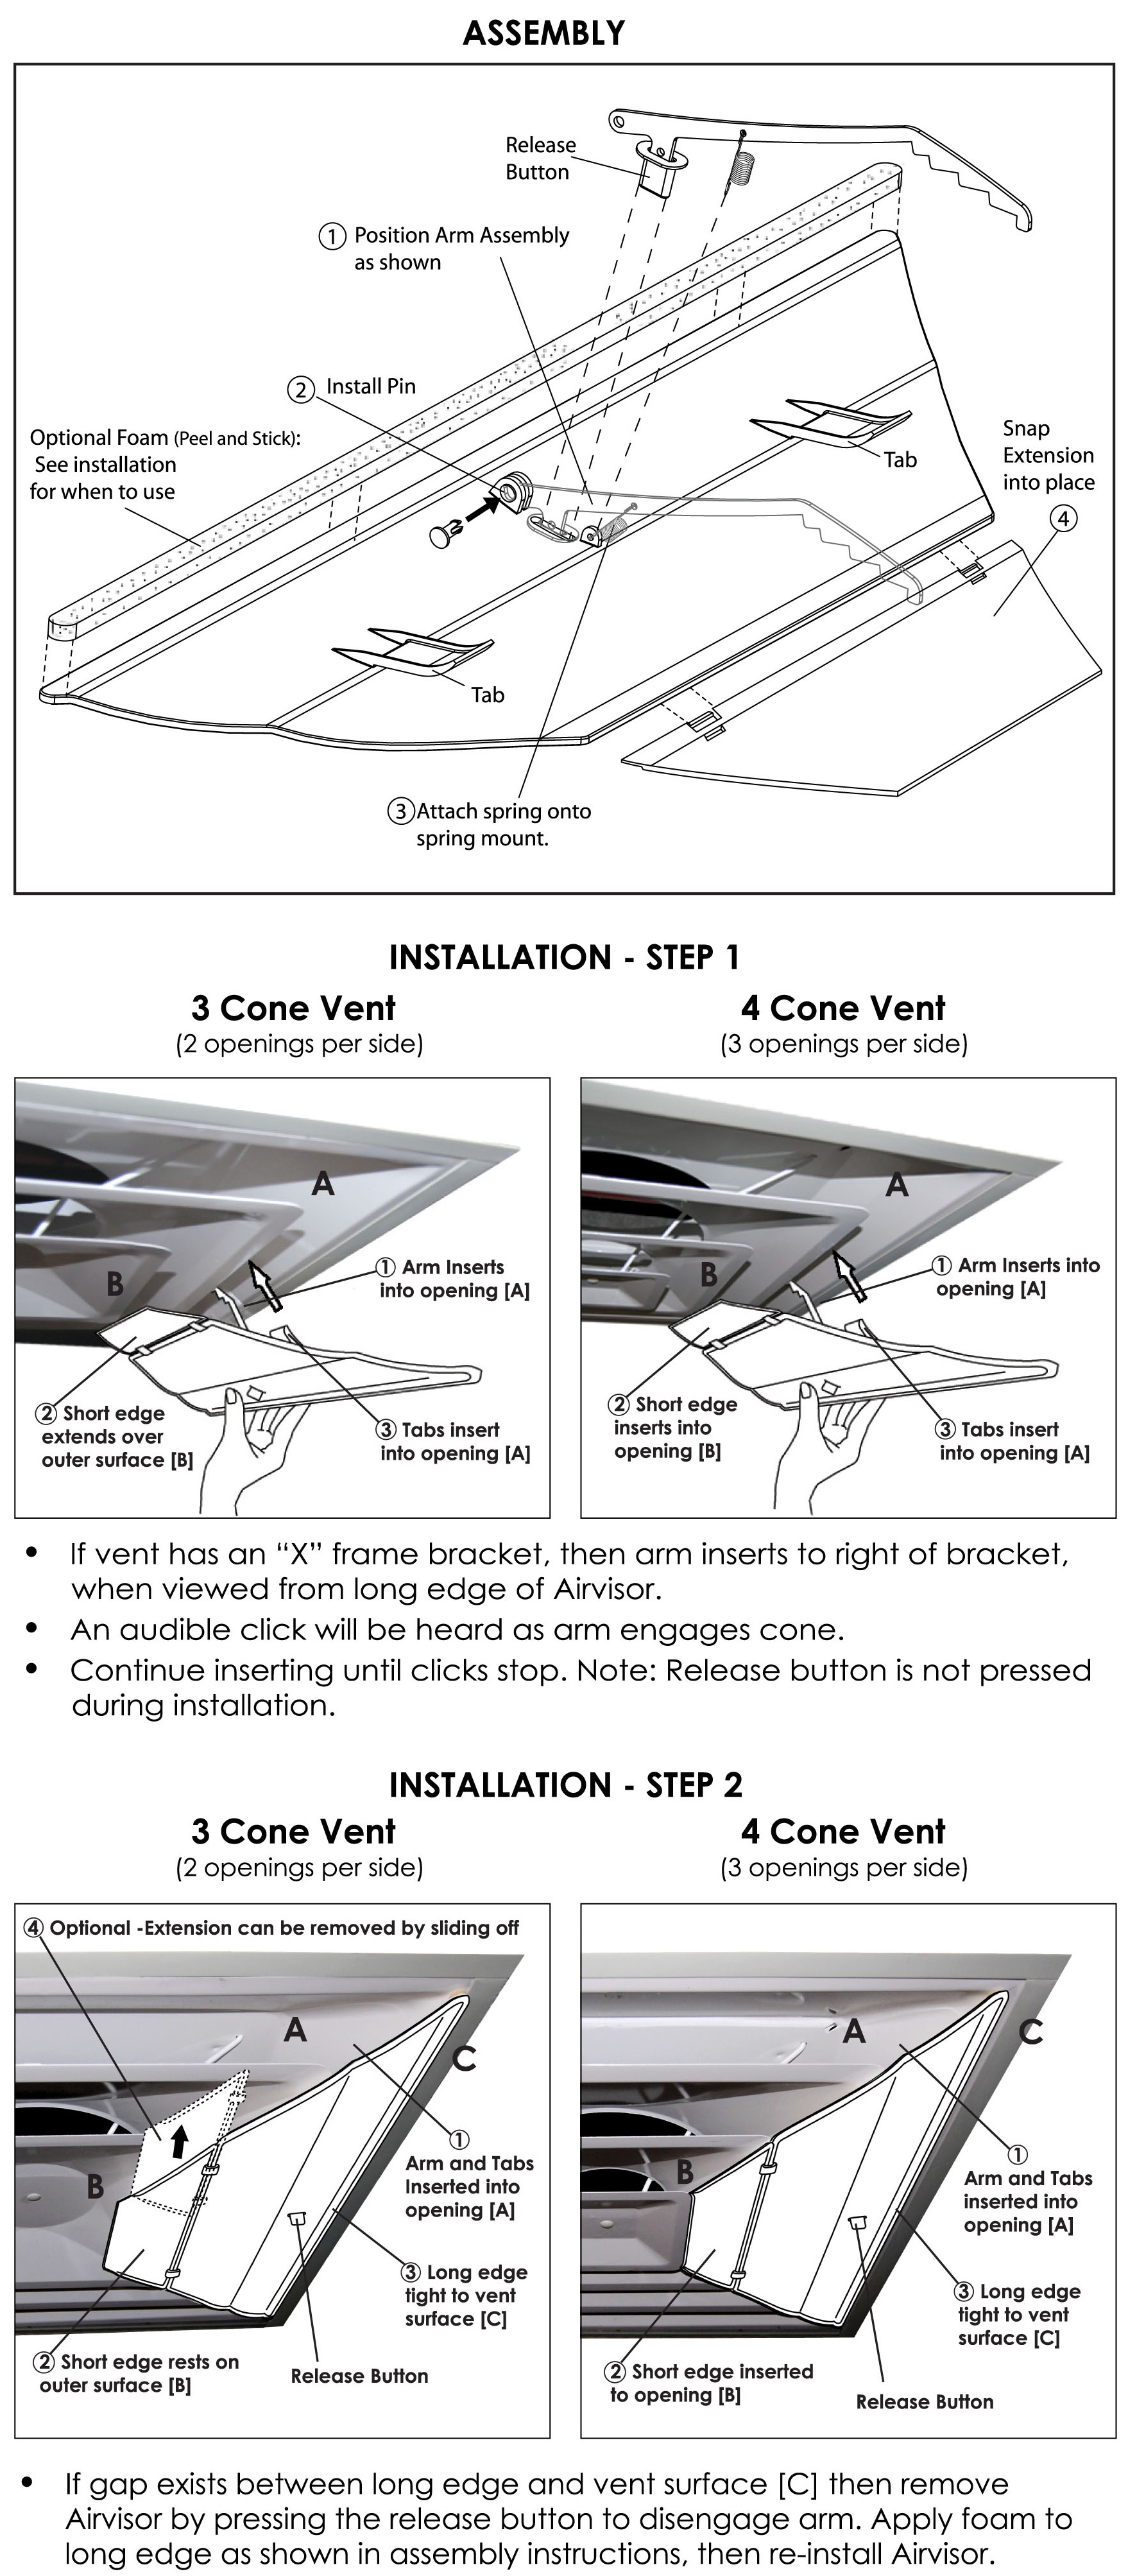 Airvisor air deflector for ceiling vents - Assembly and Installation Instructions